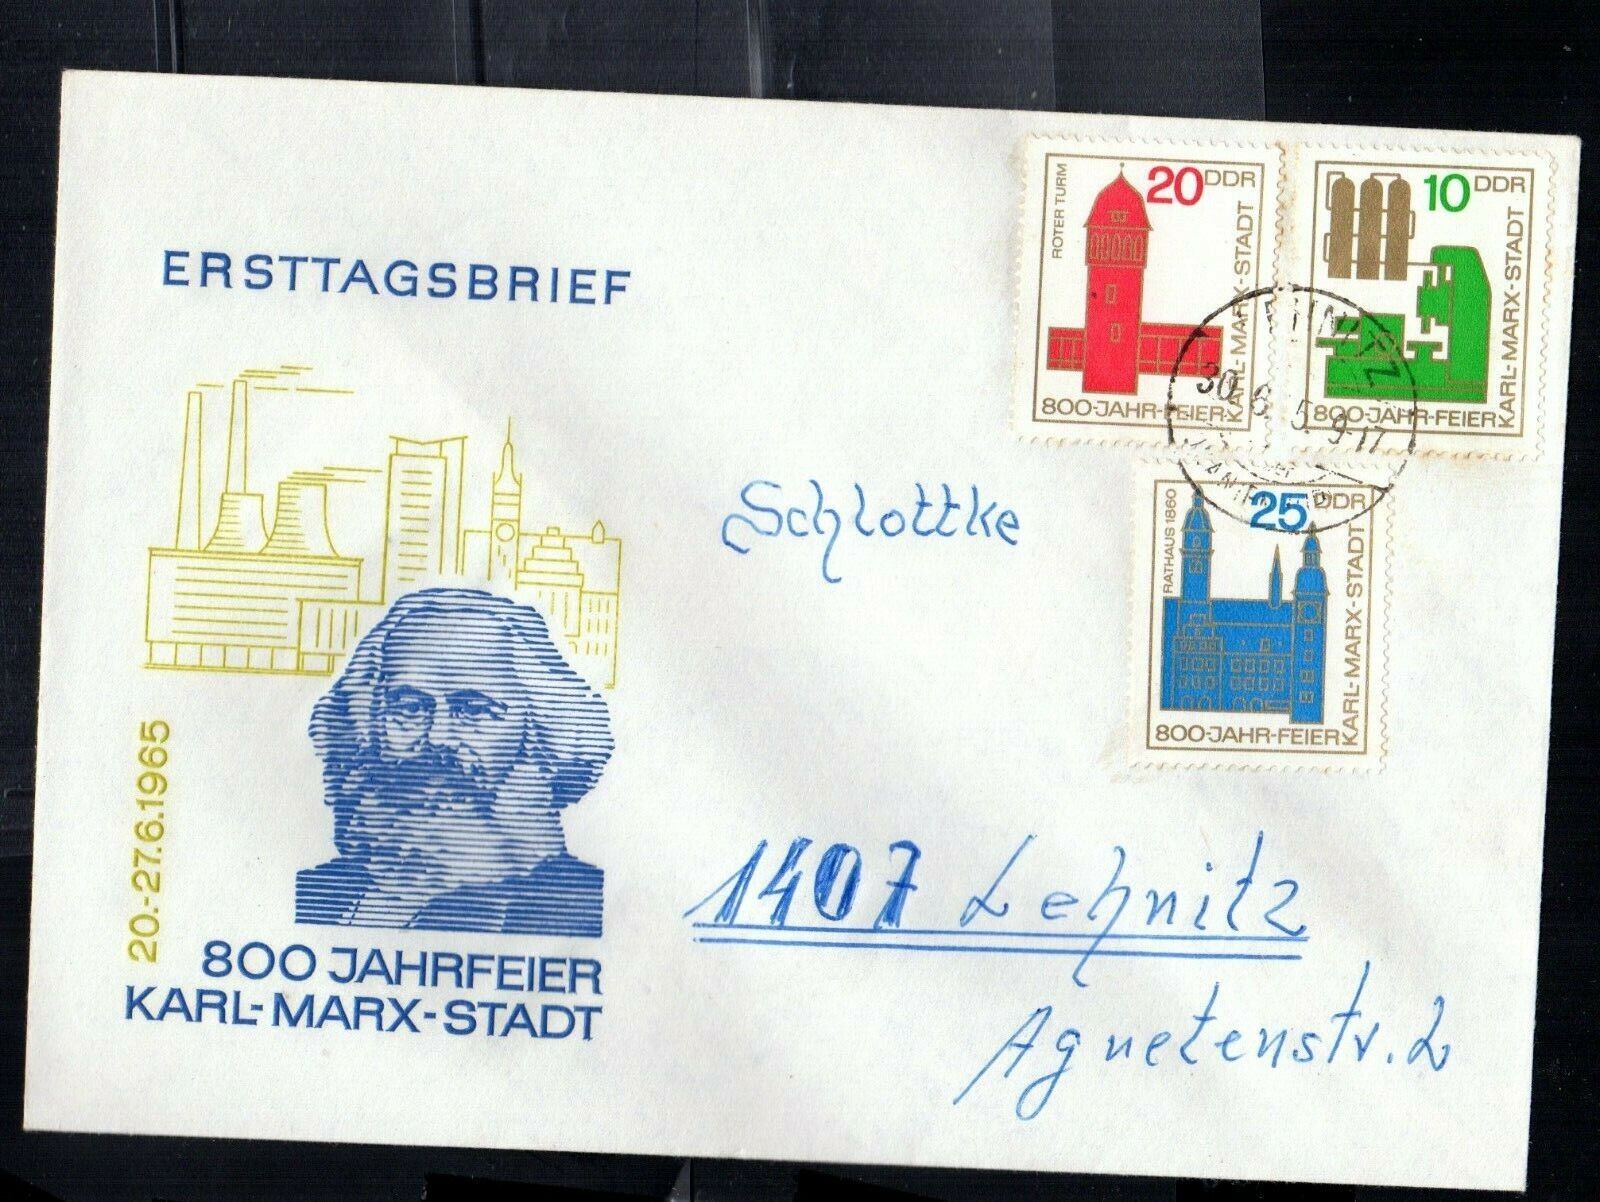 Regular store ebay 01308 Germany DDR 67% OFF of fixed price Blackpool Negweny FDC